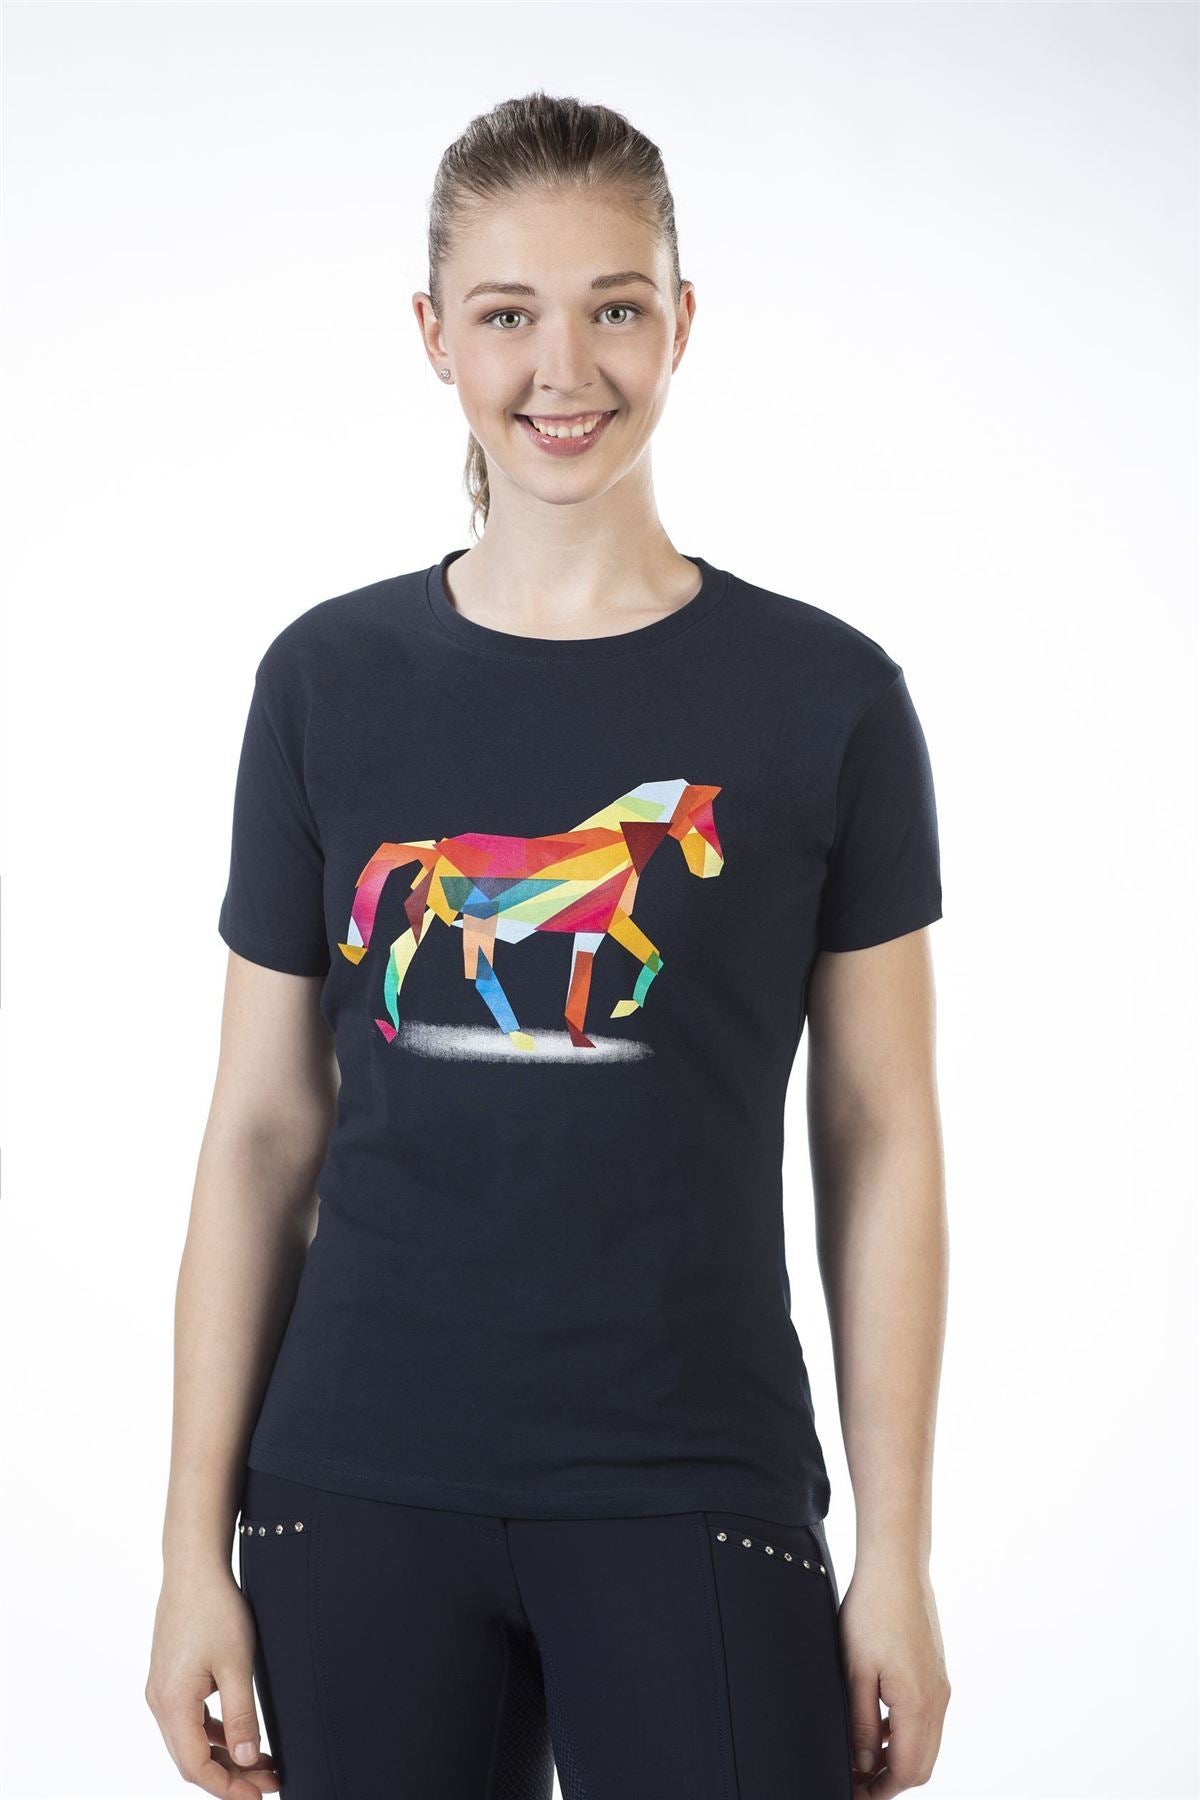 HKM Tshirt Colourful Horse - Just Horse Riders